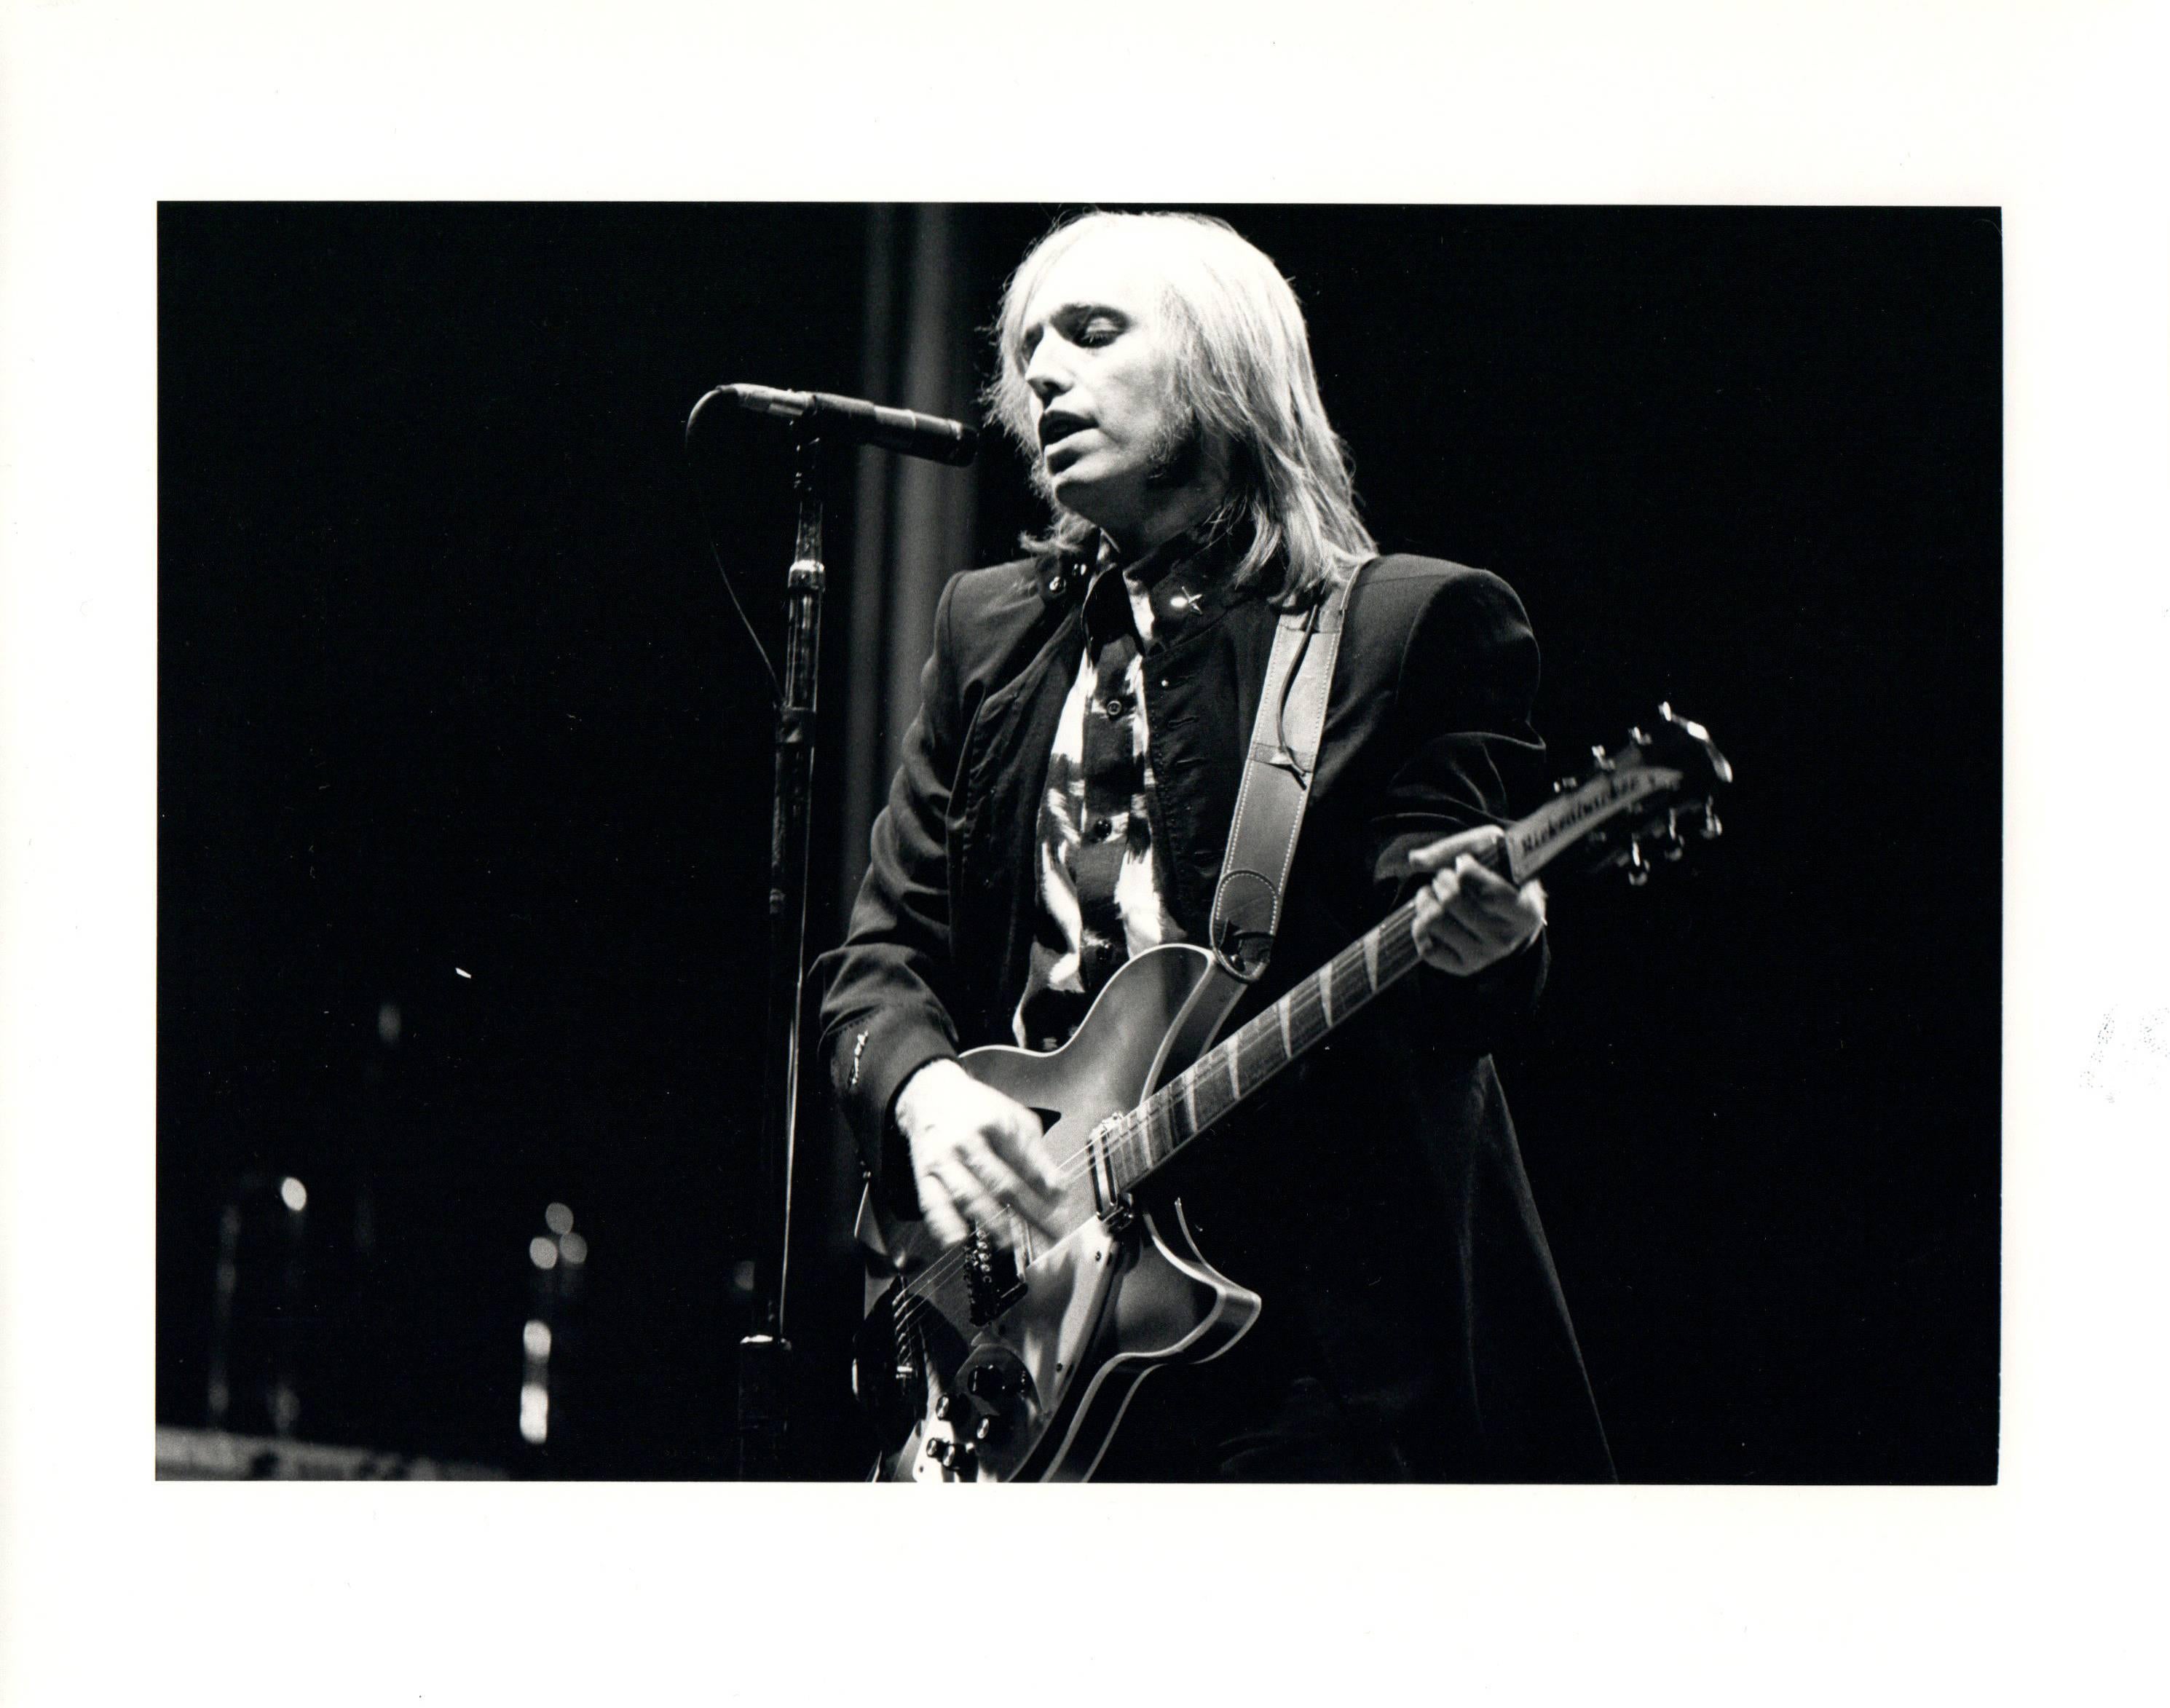 Gary Gershoff Portrait Photograph - Tom Petty at the Byrne Arena Vintage Original Photograph